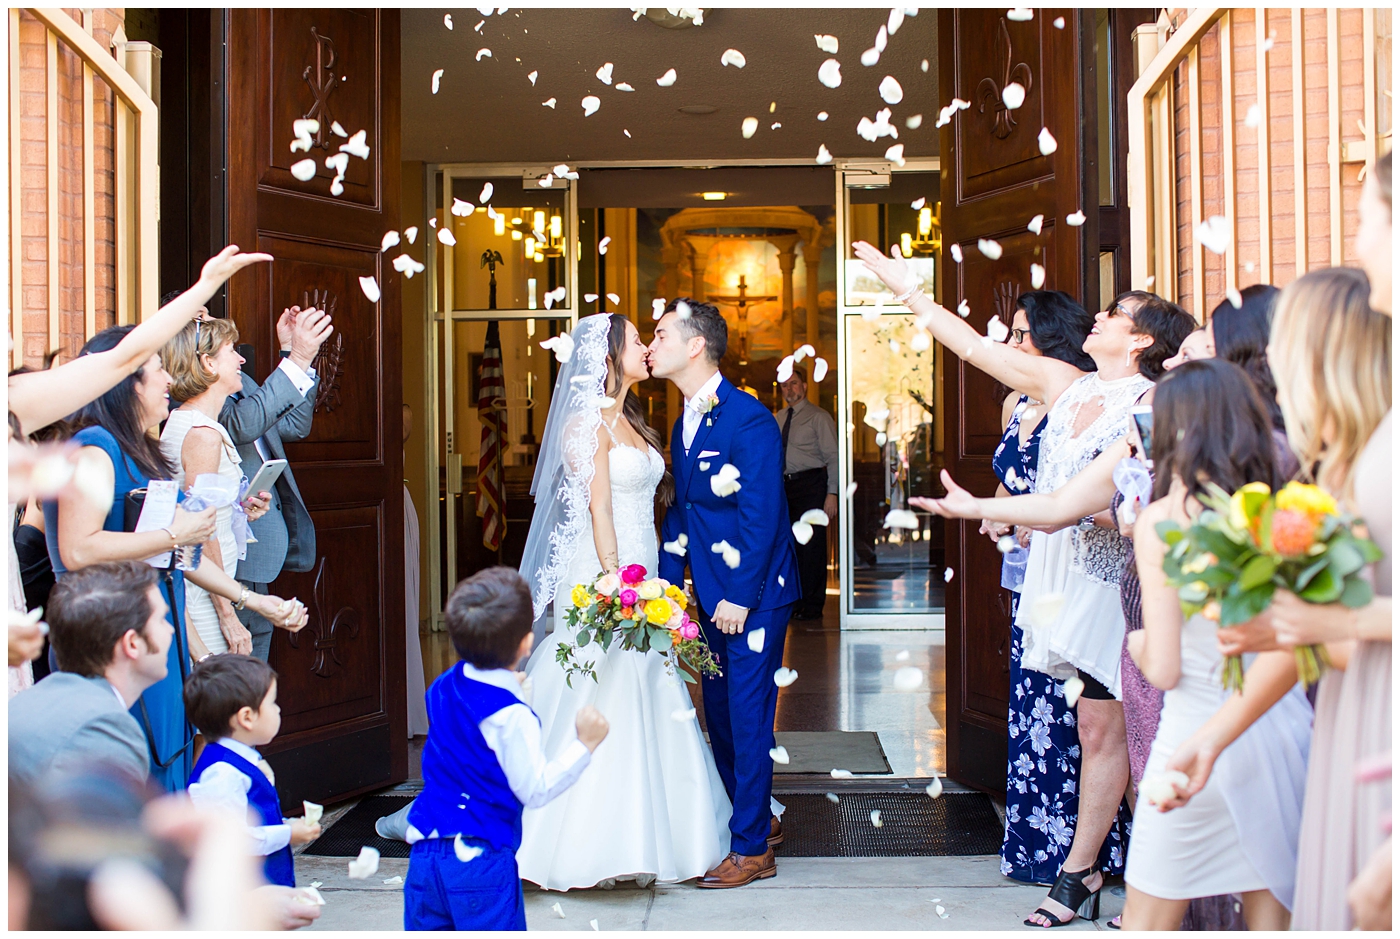 bride in lace cap sleeve wedding dress with bright pink, yellow and green flower bouquets with groom in blue suit on wedding day at church getting flower petals thrown as they exit